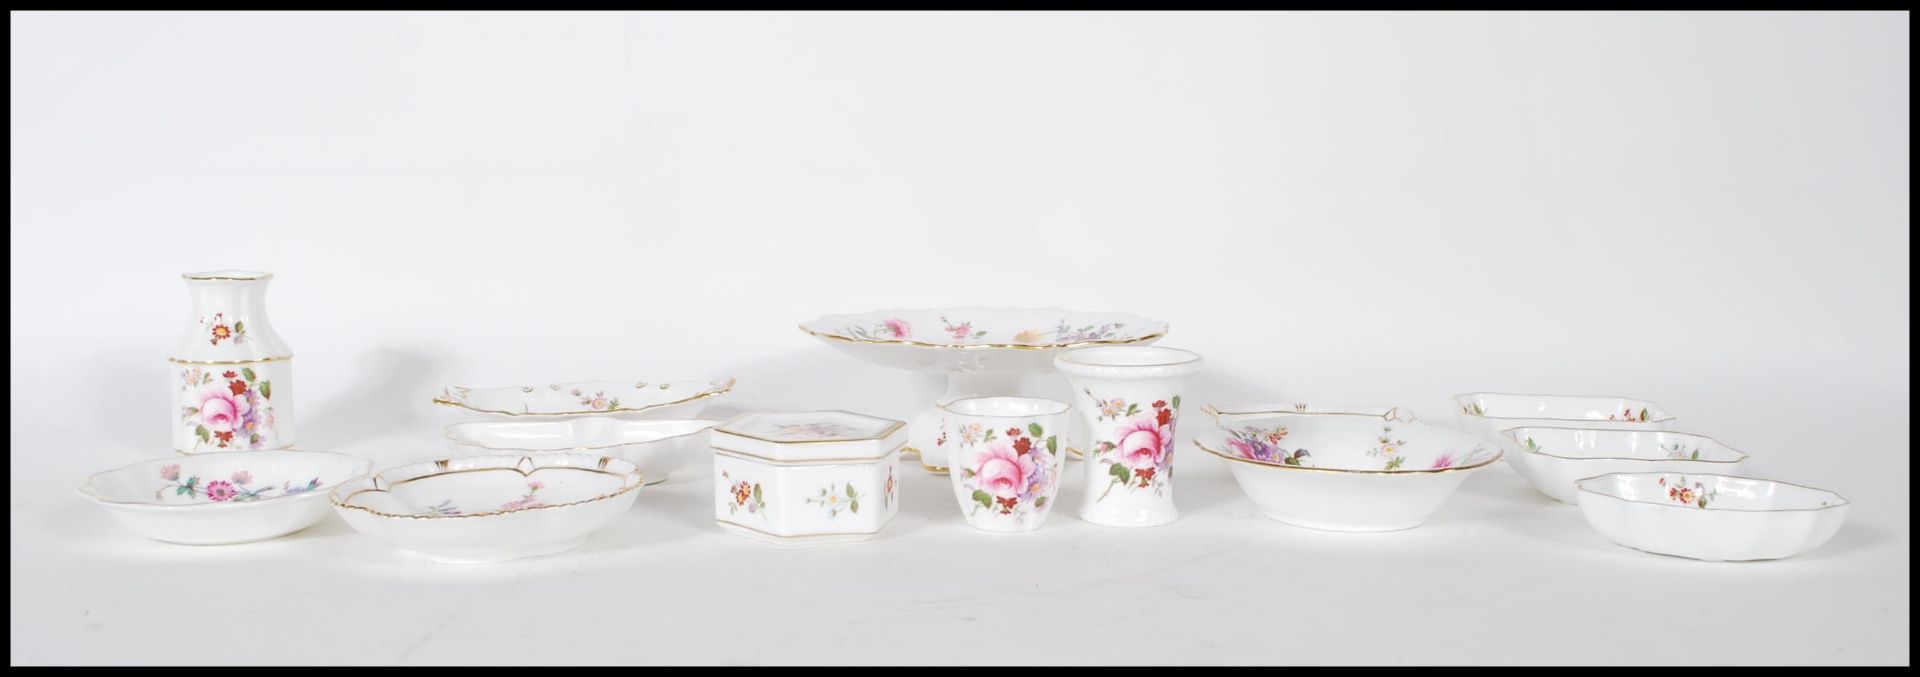 A collection of fourteen pieces of bone china by Royal Crown Derby, all decorated with fauna and